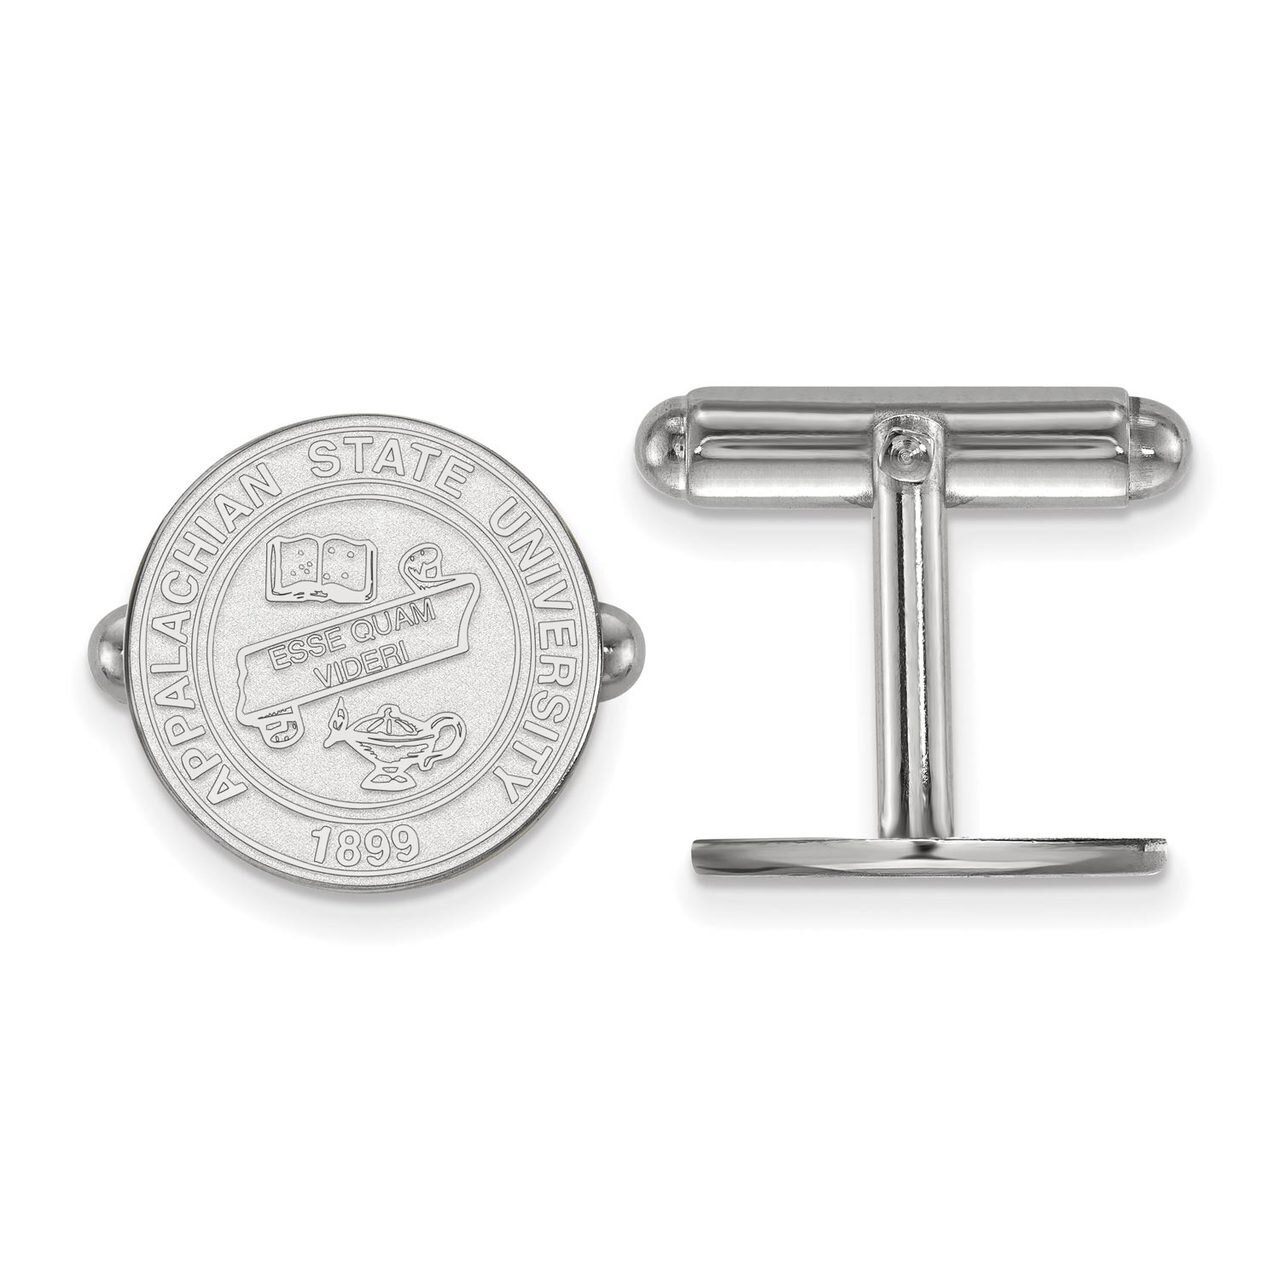 Appalachian State University Crest Cuff Link Sterling Silver SS022APS